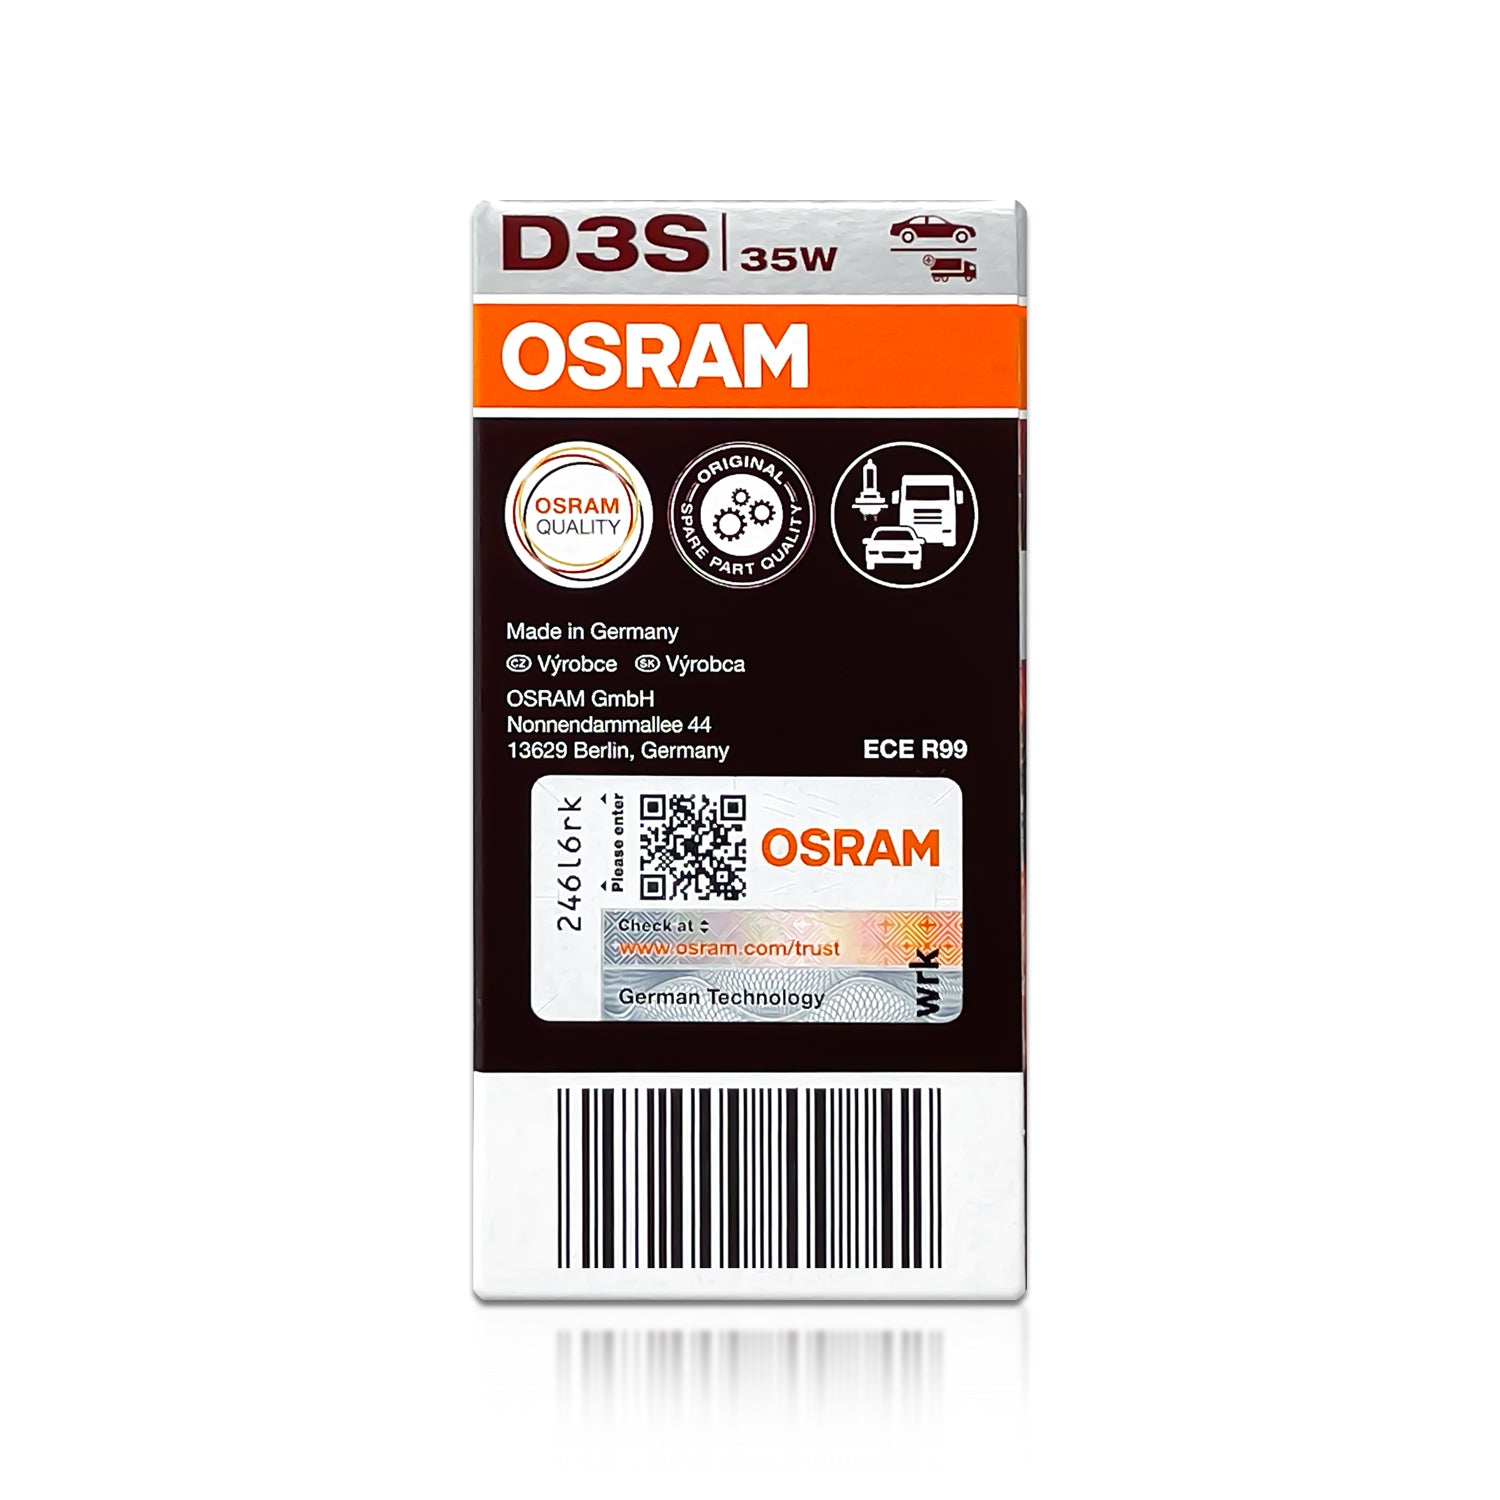 Biyans Motor Sports INC. - NEW! D3S – OSRAM XENARC NIGHT BREAKER LASER  66340XNL HID XENON HEADLIGHT BULBS UP TO 200% MORE BRIGHTNESS, UP TO 250M  LONG BEAM, AND UP TO 20%